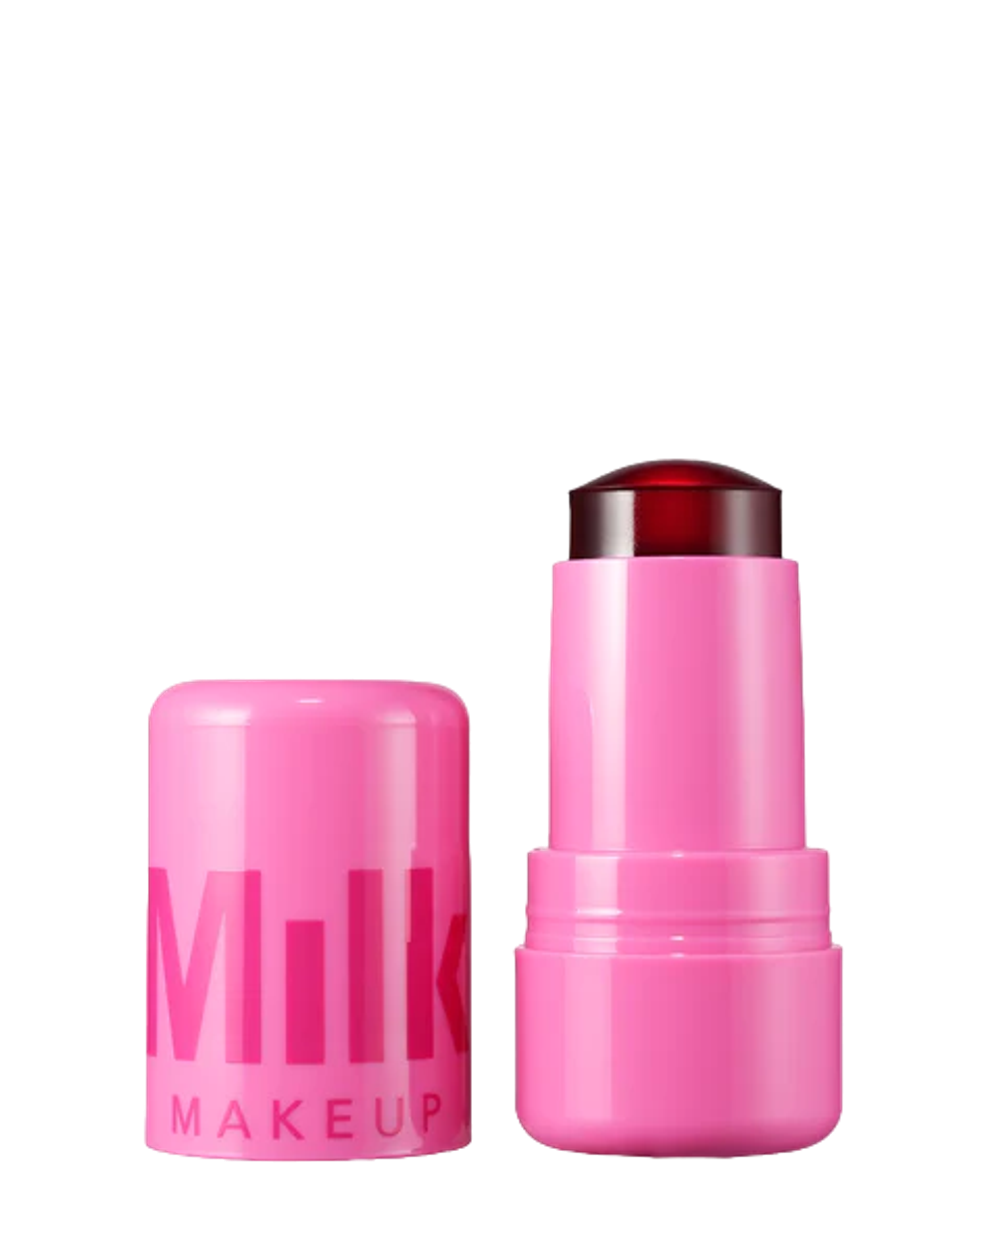 MILK MakeUp Cooling Water Jelly Tint Blush + Lip Stain